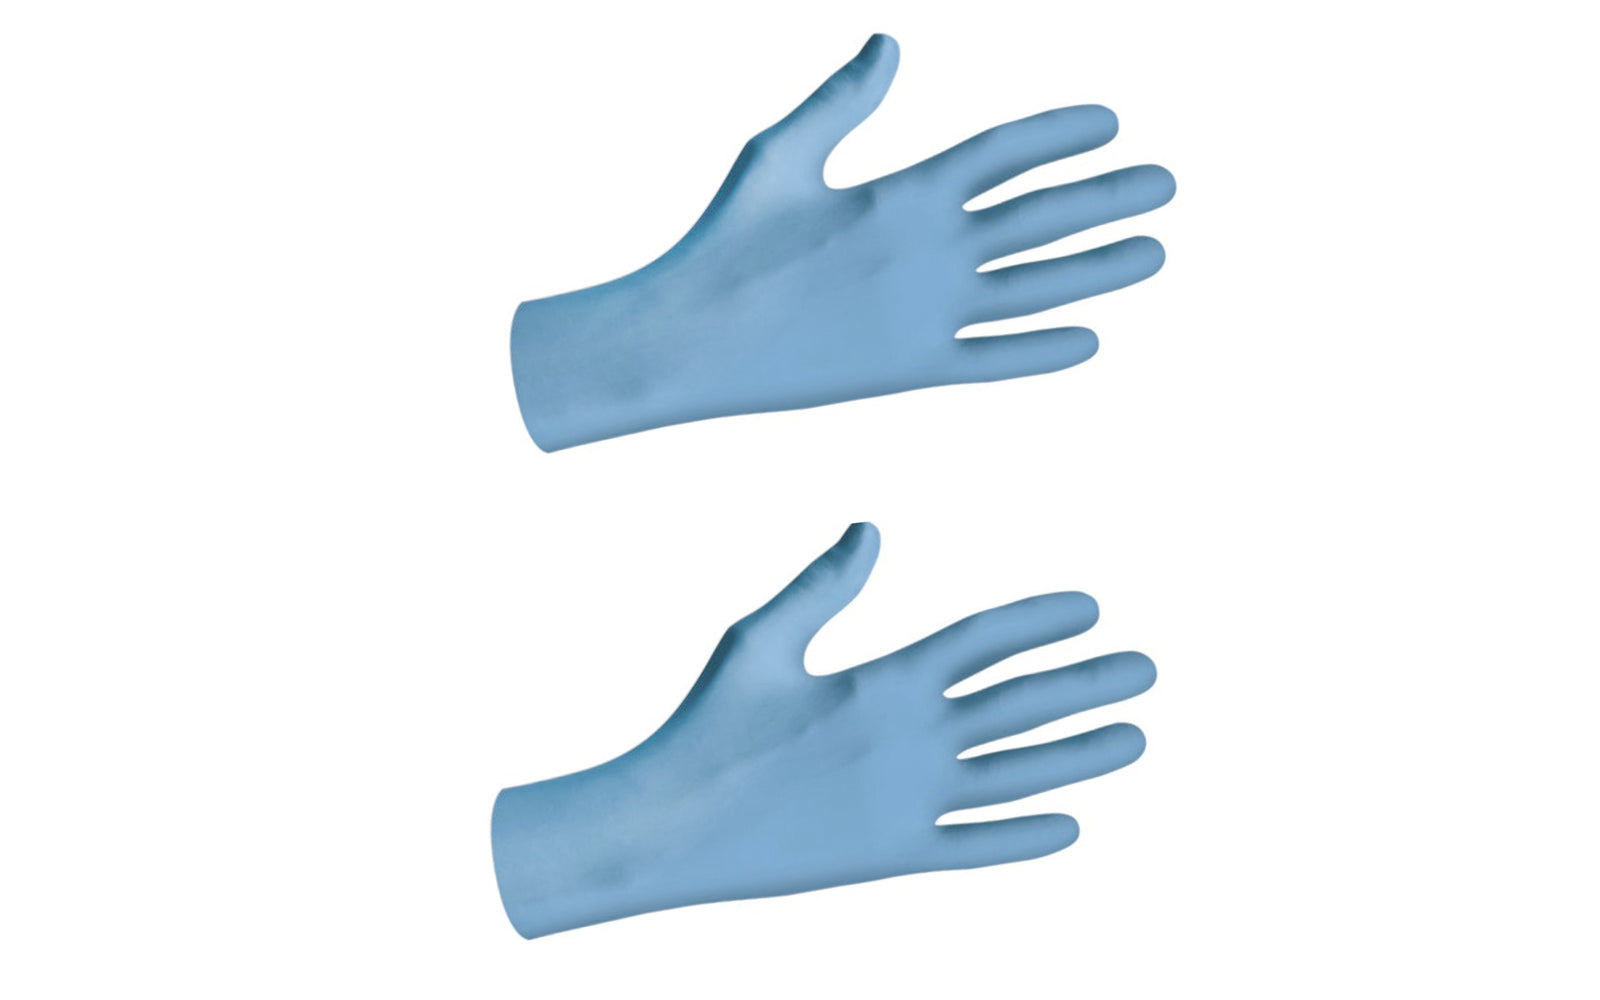 Bue Nitrile Biodegradable Disposable Gloves - 100 Pack. Biodegradable, single use nitrile gloves. Features biodegradation in biologically active landfills. Powder-free, silicone-free, low-modulus 100% nitrile. Bisque fingertips. 9-1/2